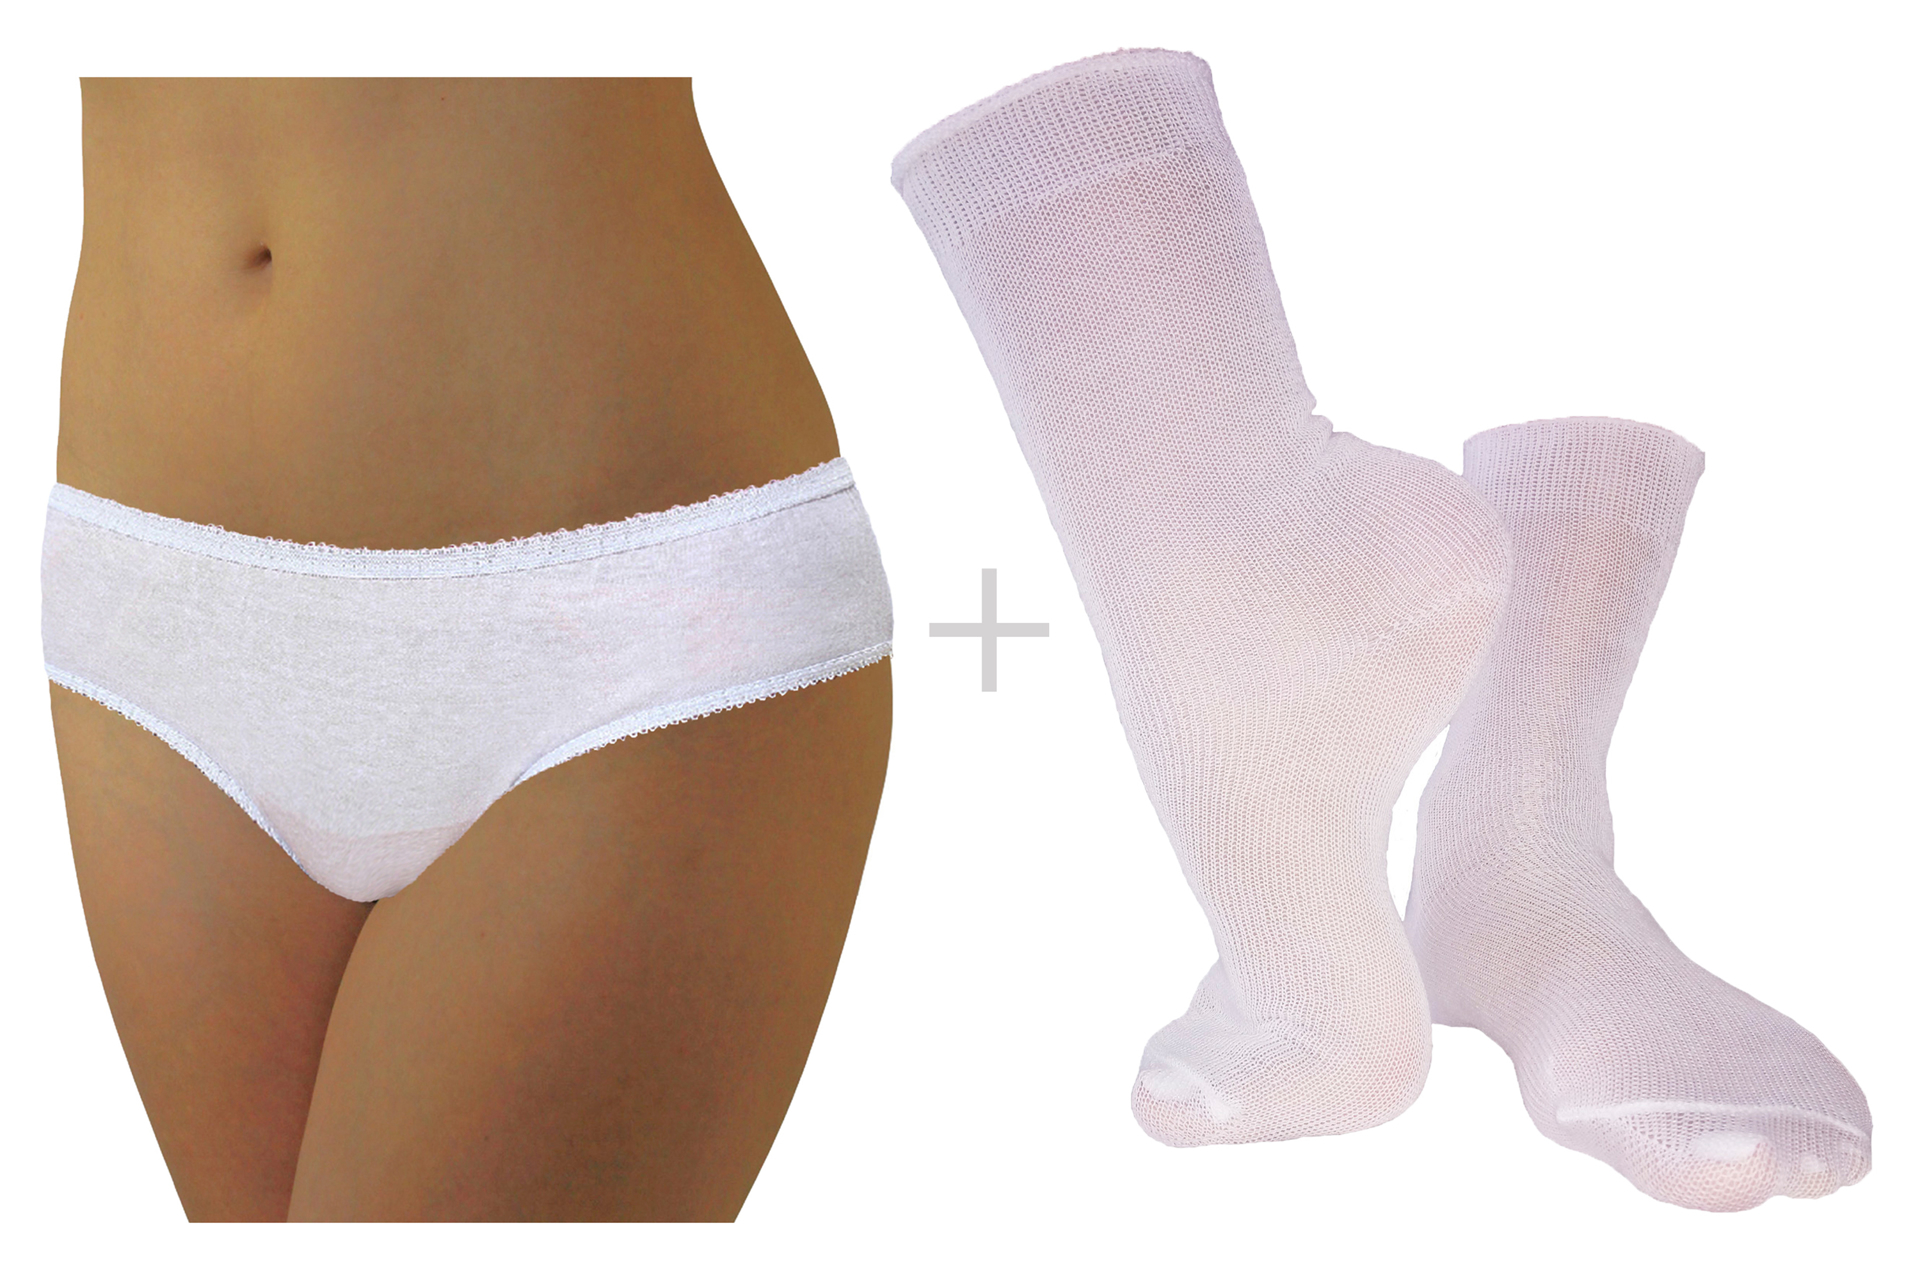 https://www.underworks.com/images/thumbs/0002042_underworks-combo-women-panties-and-crew-socks-10-pack-of-womens-disposable-100-cotton-underwear-and-.jpeg